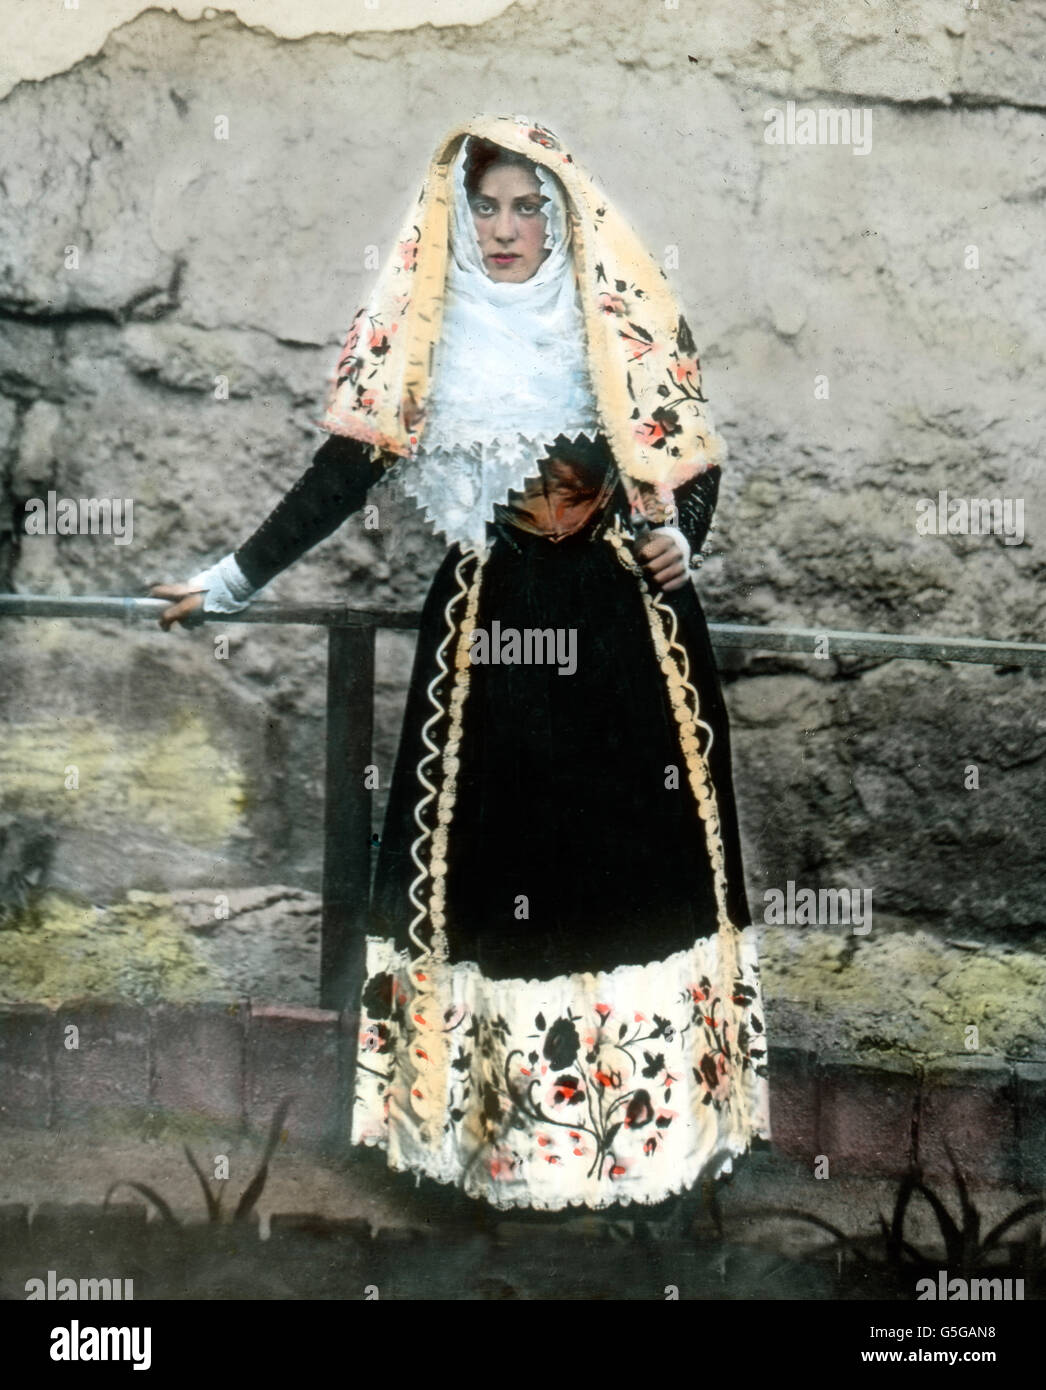 Junge Italienerin in Volkstracht. Young Italian woman in her array. Italy, woman, pose, posiing, fashion, array, tradition, traditional, dress, volcanicity, volcanism, geology, history, historical, 1910s, 1920s, 20th century, archive, Carl Simon, hand-coloured glass slide Stock Photo